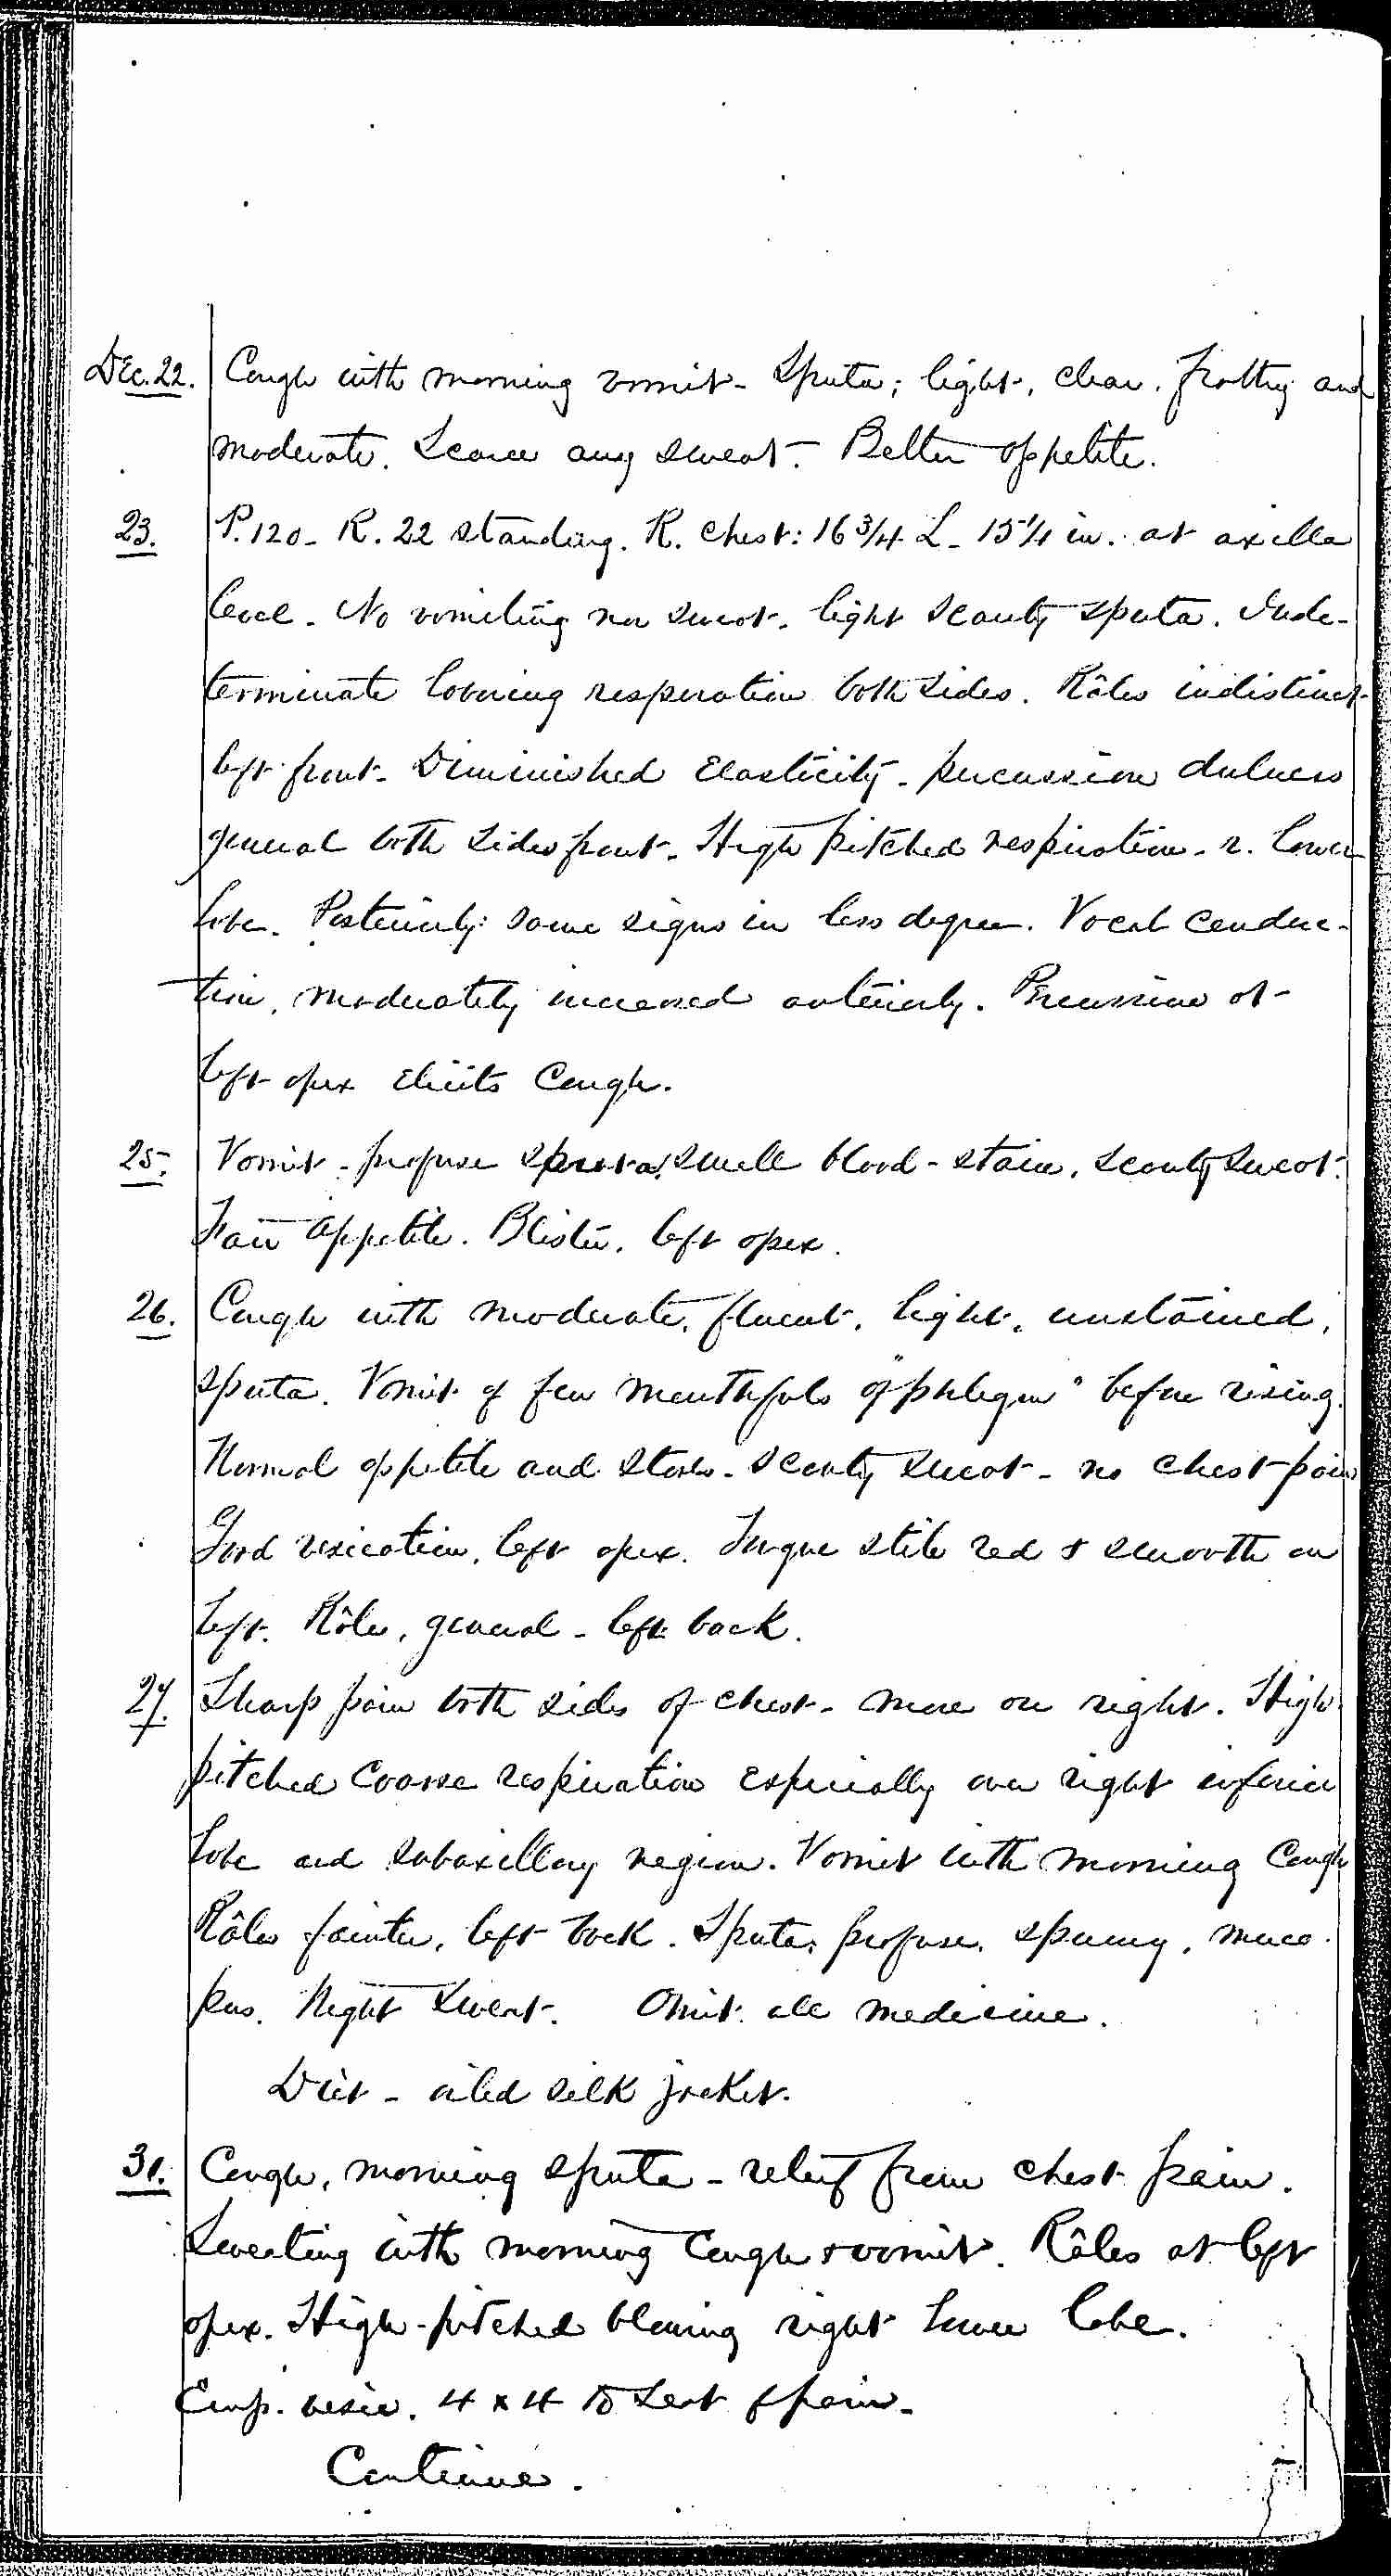 Entry for Hugh Riley (page 20 of 31) in the log Hospital Tickets and Case Papers - Naval Hospital - Washington, D.C. - 1868-69